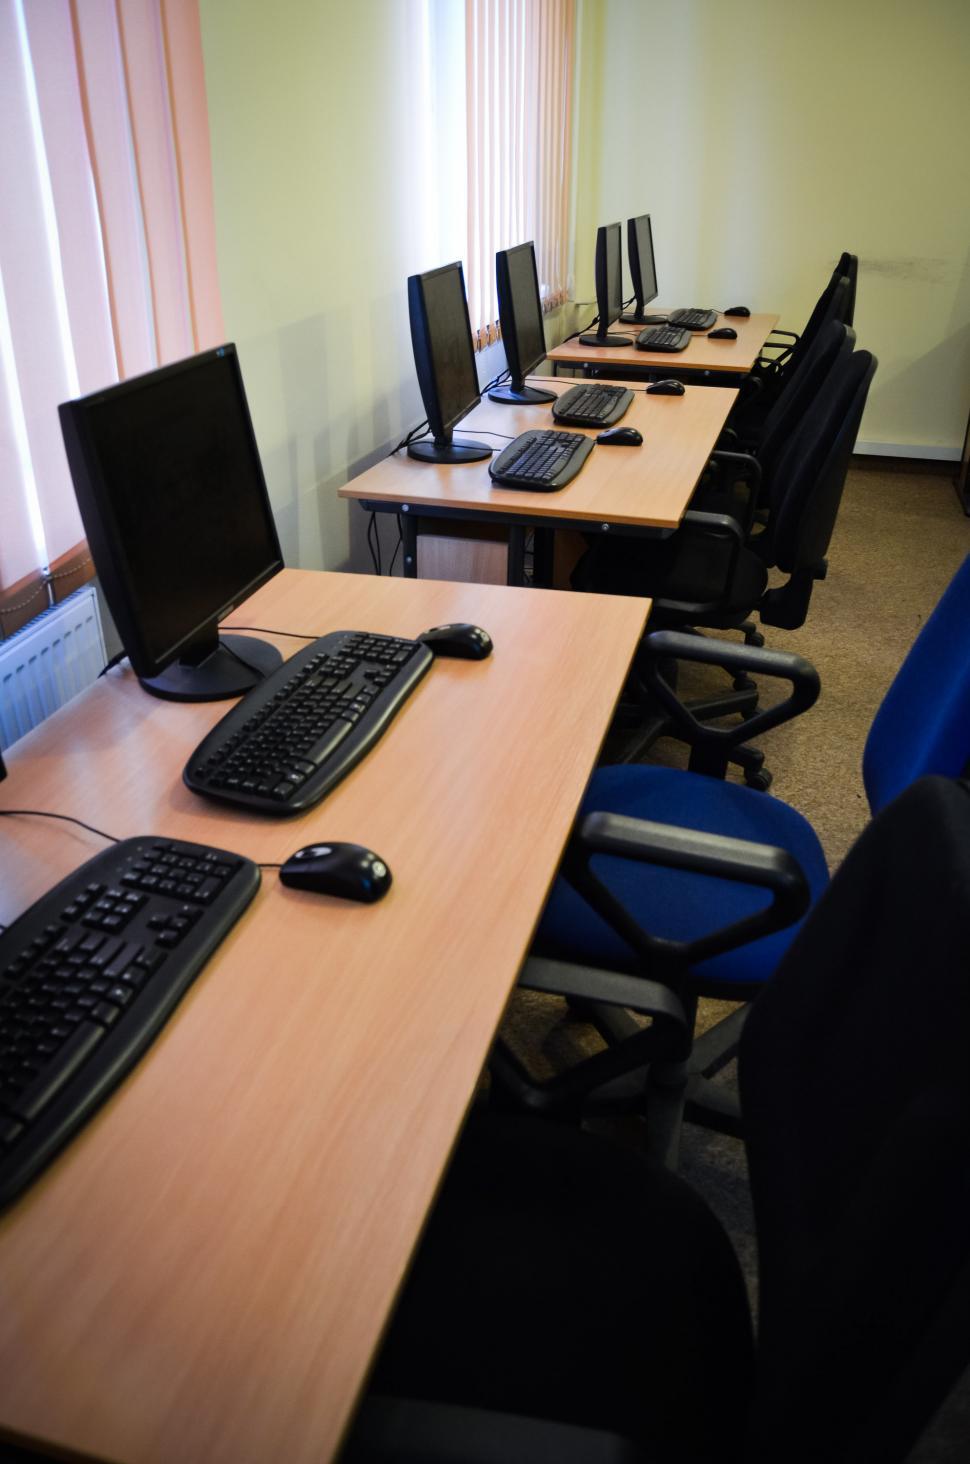 Free Image of A Row of Computer Monitors on Desk 